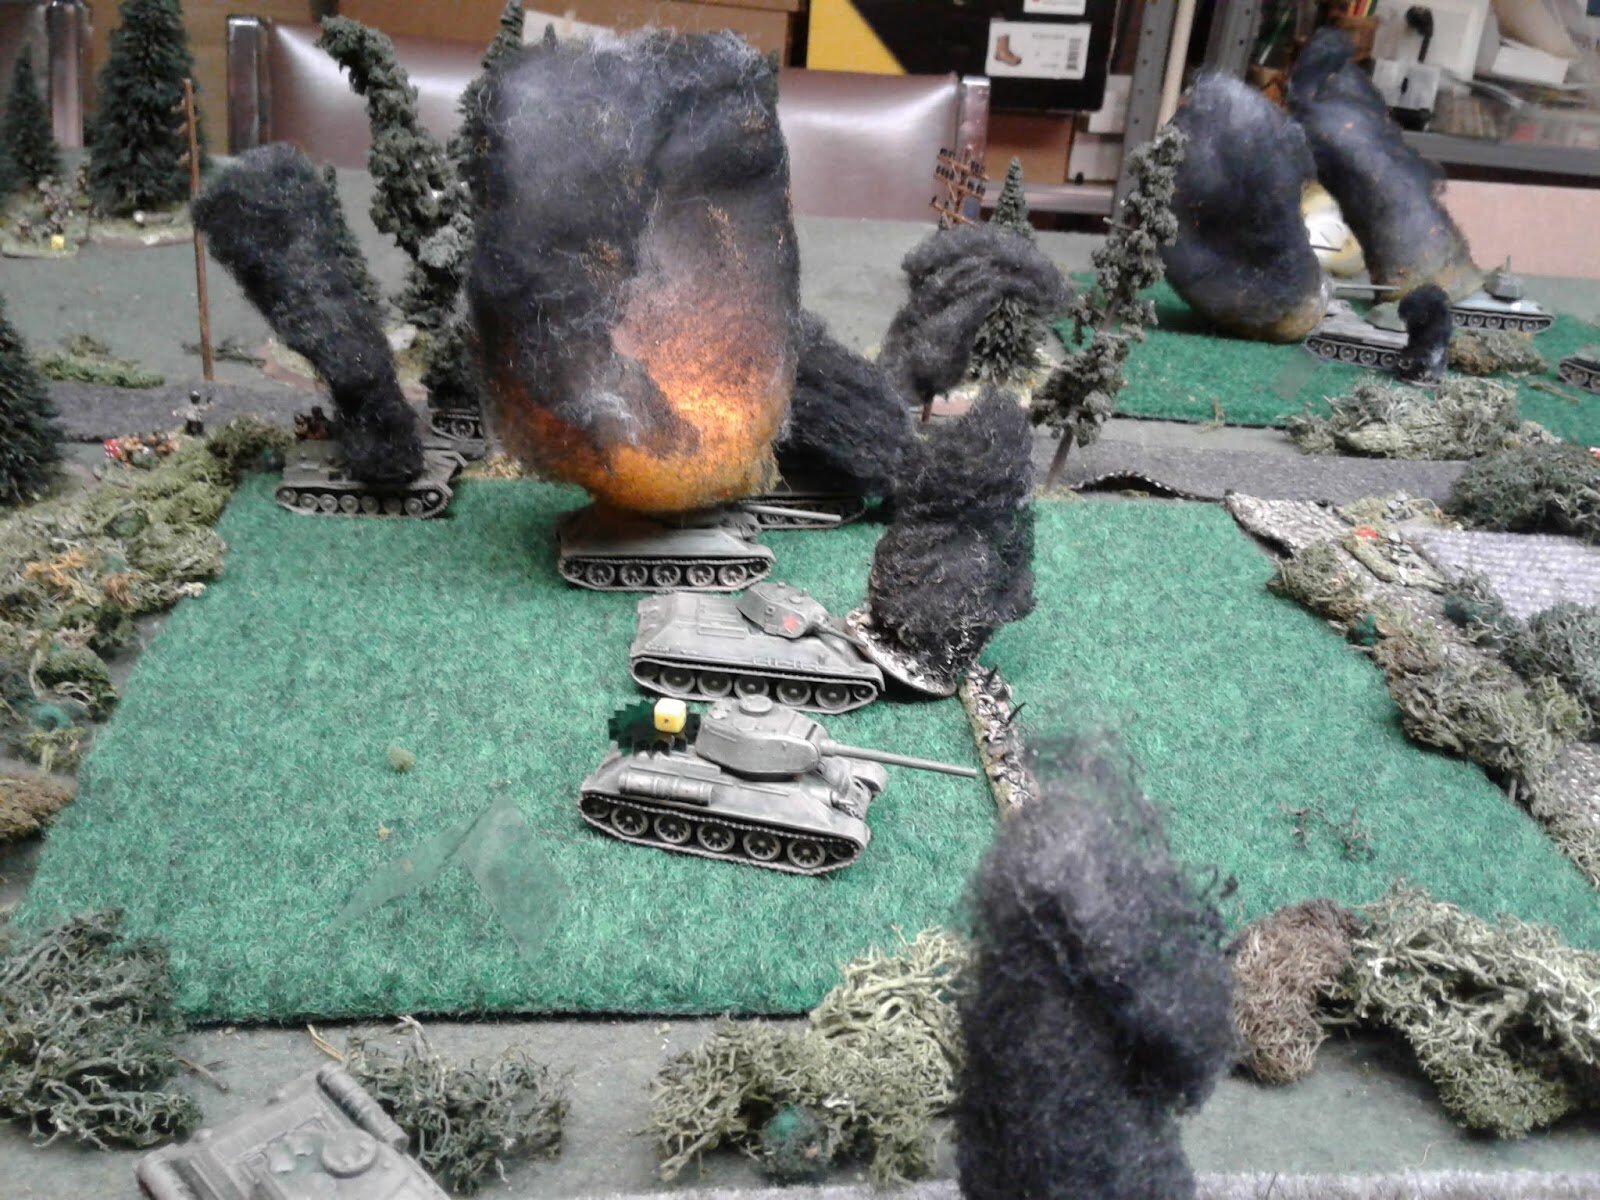 That last turn of shooting from the Centurions took the wind out of the Bordurian advance.